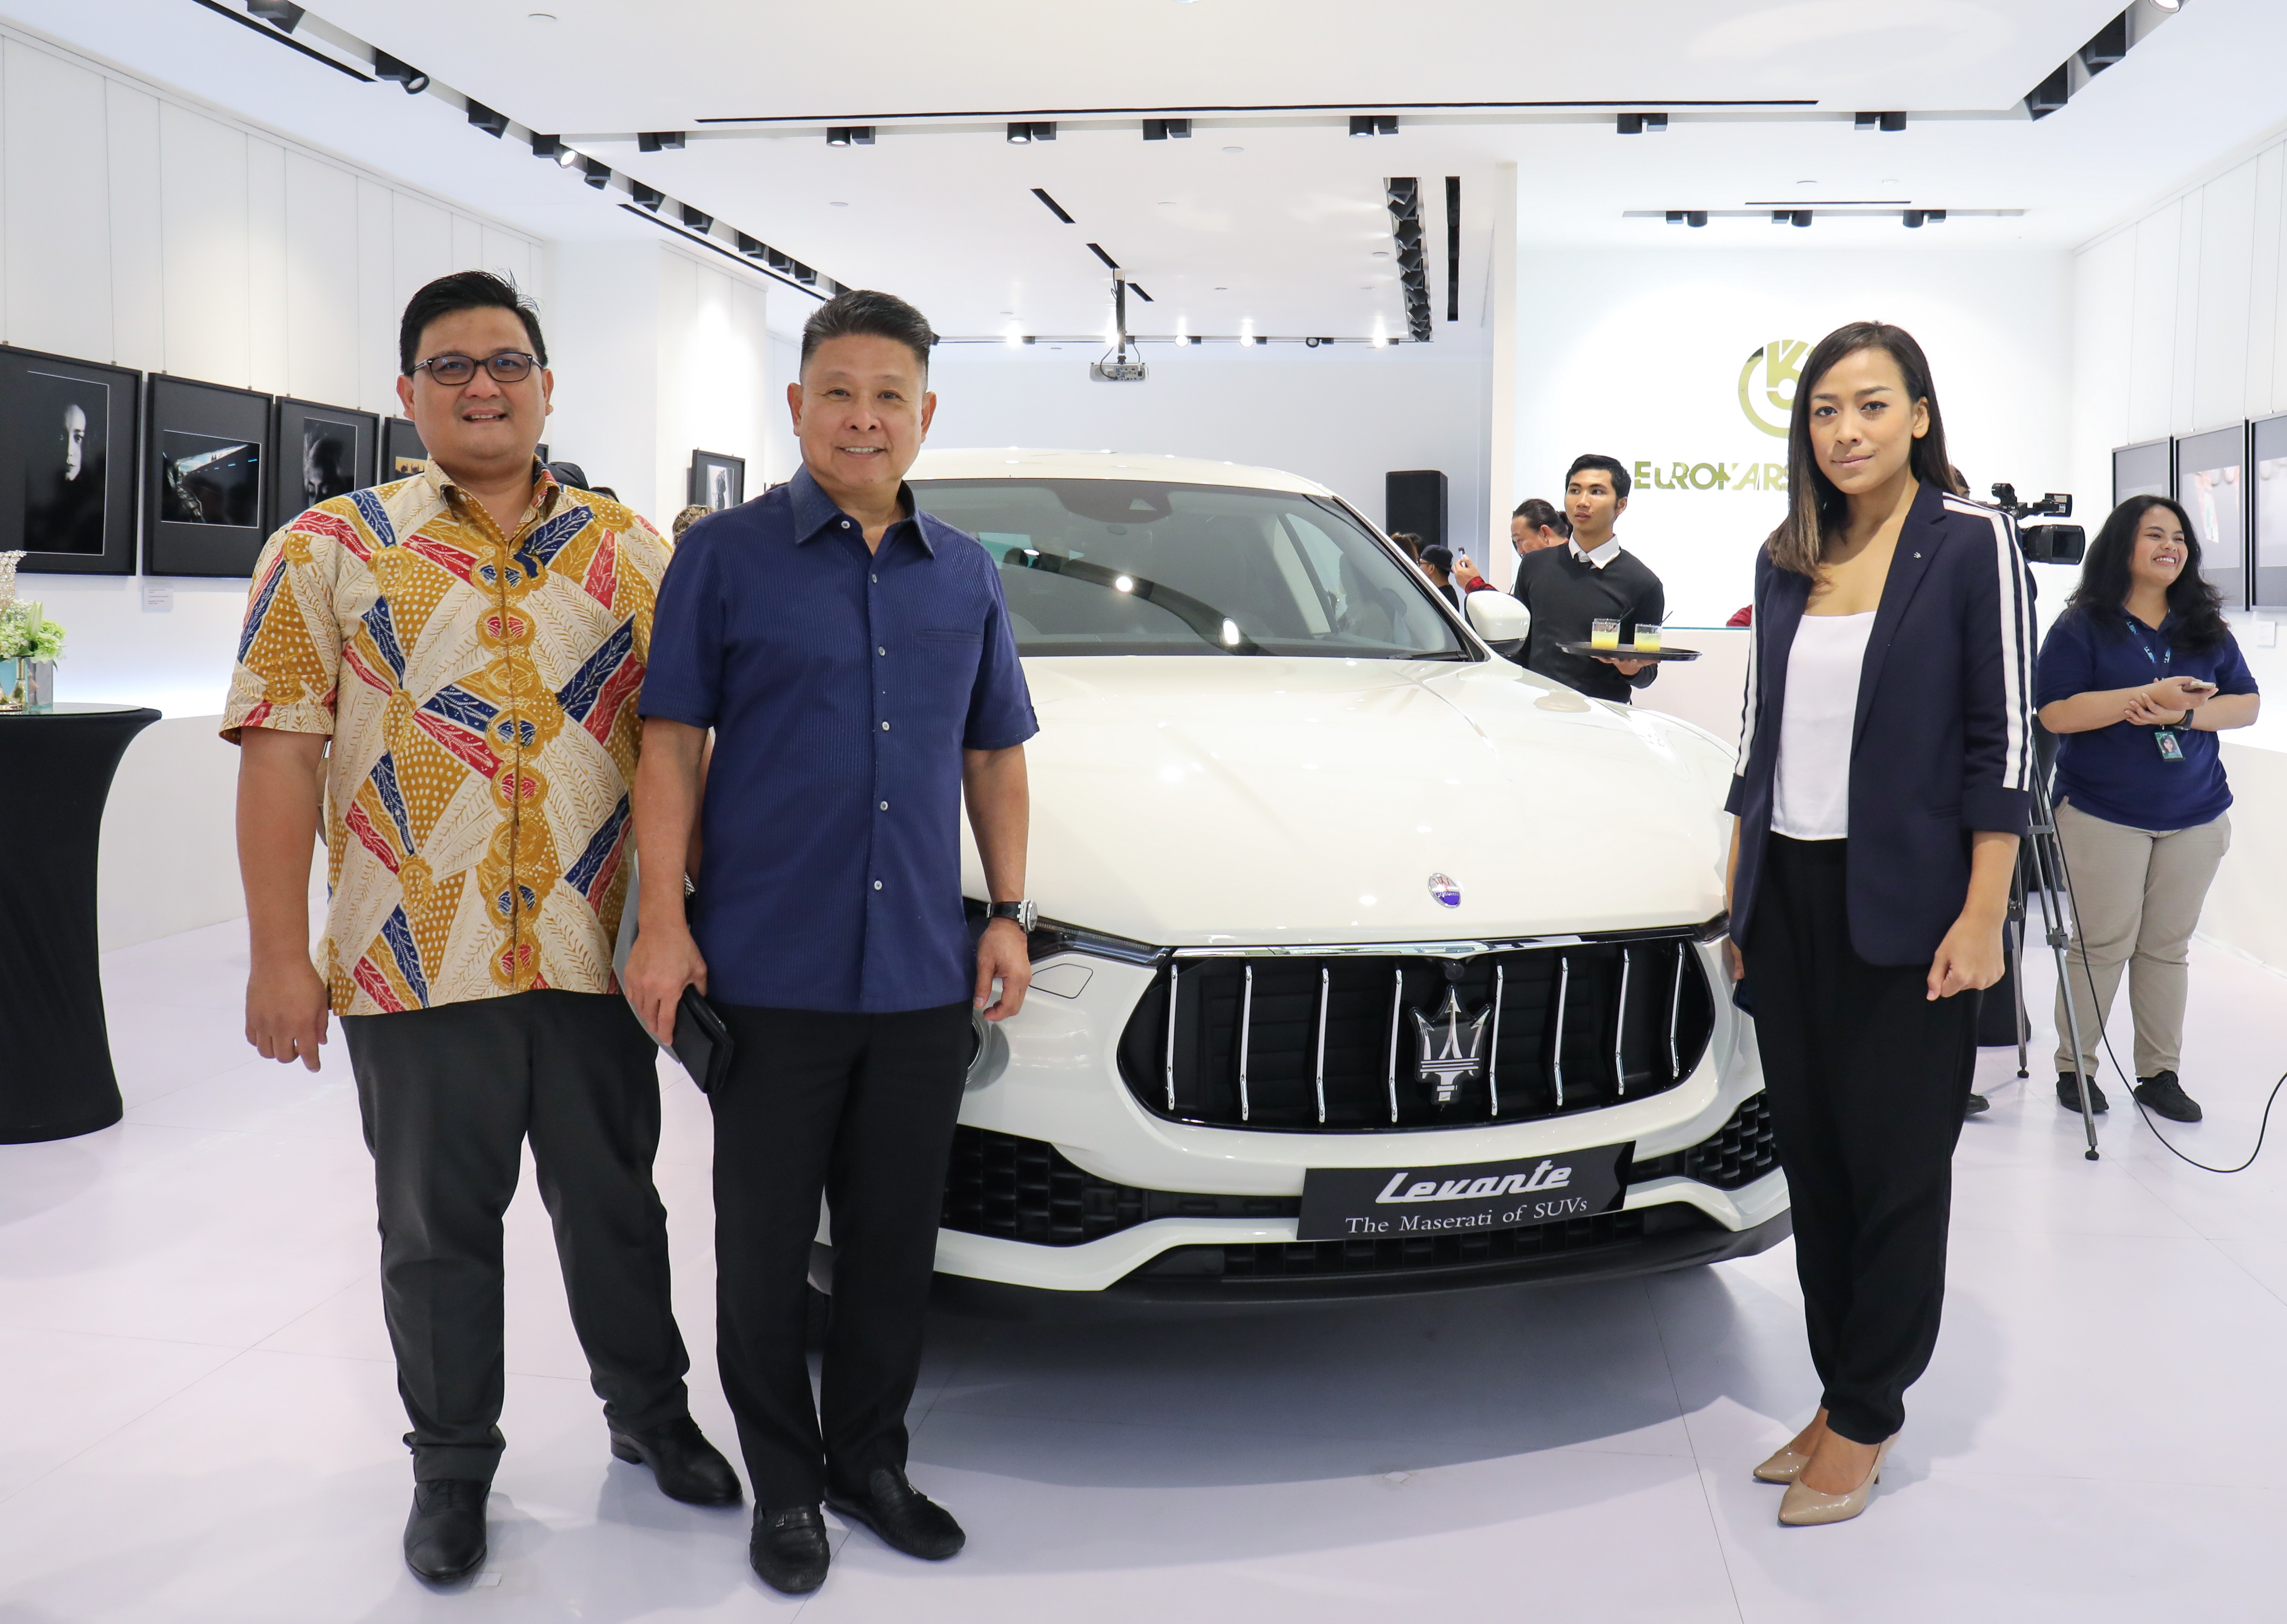 (From left to right): Mr Donny Makalew, General Manager, Maserati Indonesia; guest of Maserati Indonesia Mr Freddy Soenjoyo and Ms Chendy Sumera, Corporate Commercial Manager, Eurokars Group Indonesia 